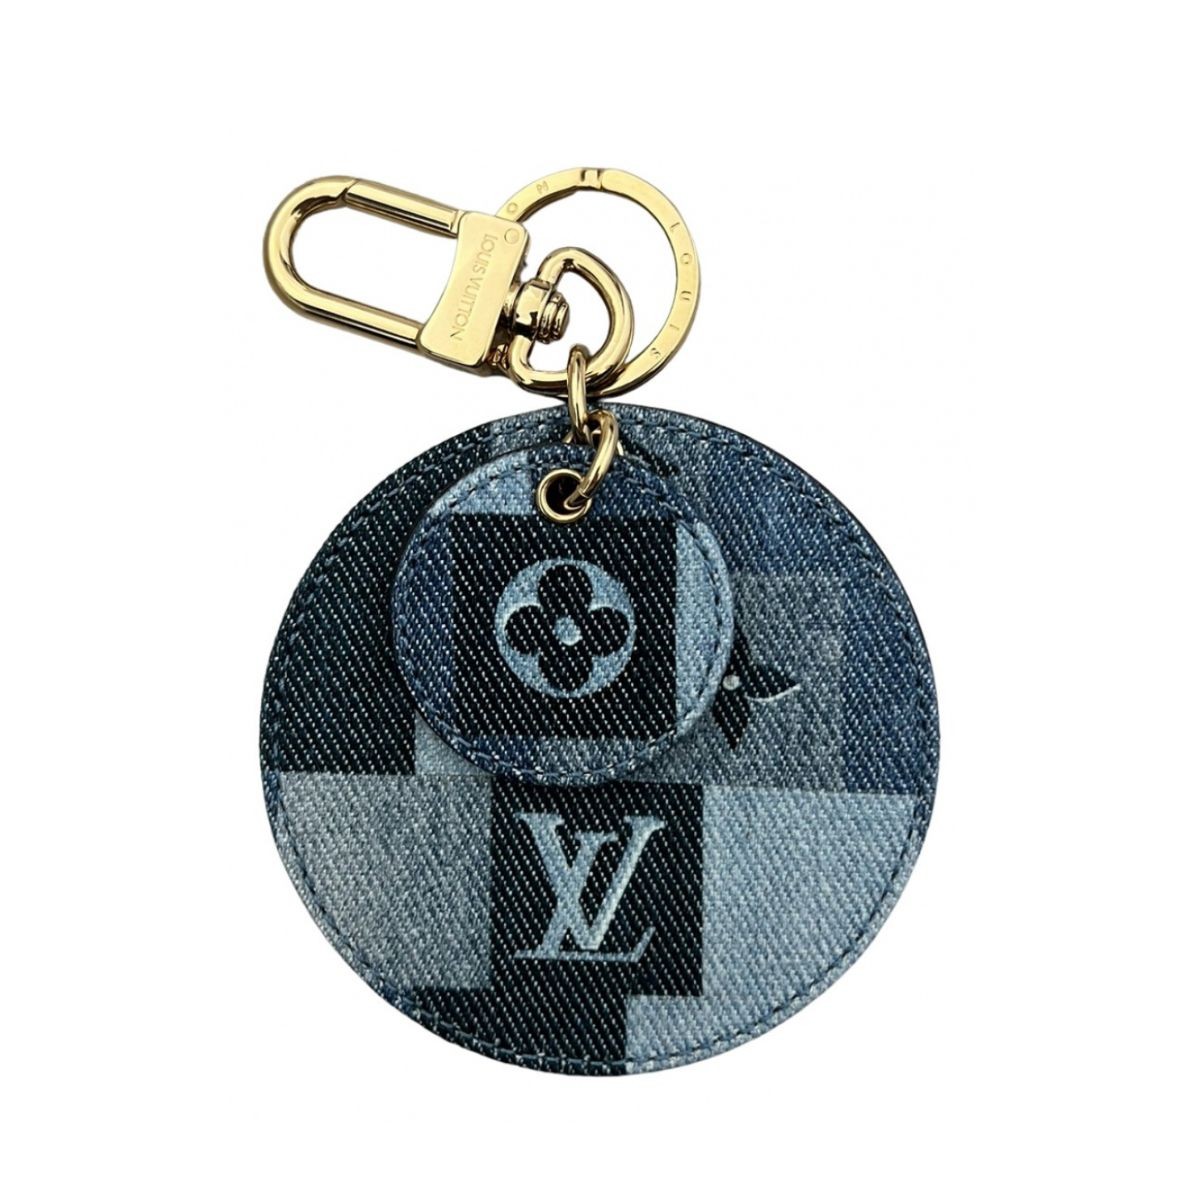 LOUIS VUITTON Sold Out! Red & Denim Patchwork Bag Charm/Key